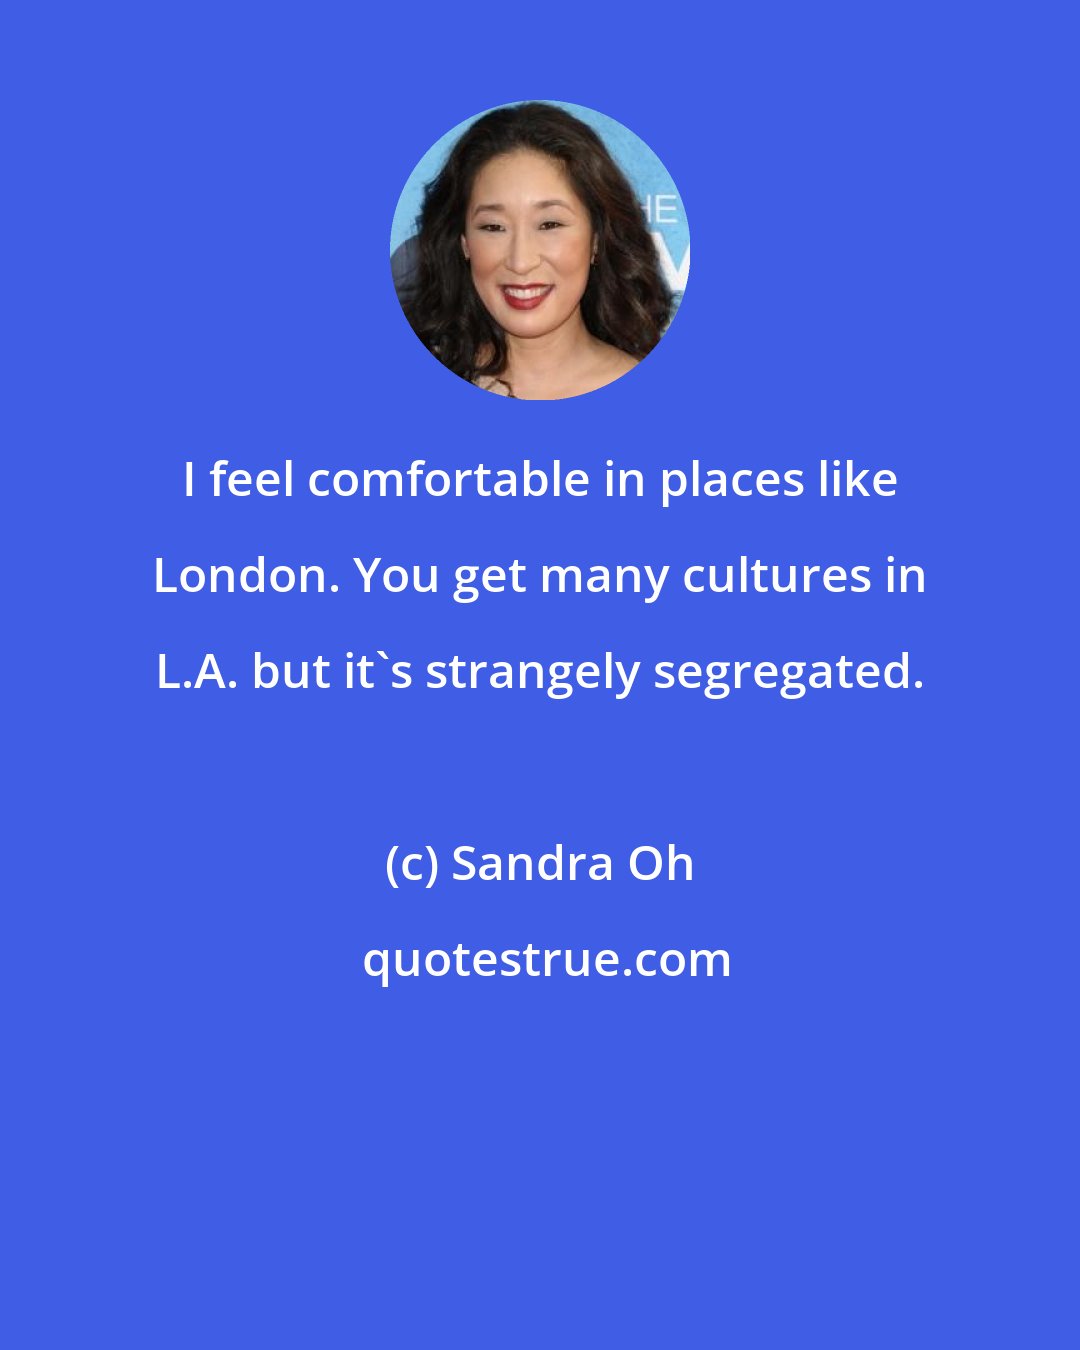 Sandra Oh: I feel comfortable in places like London. You get many cultures in L.A. but it's strangely segregated.